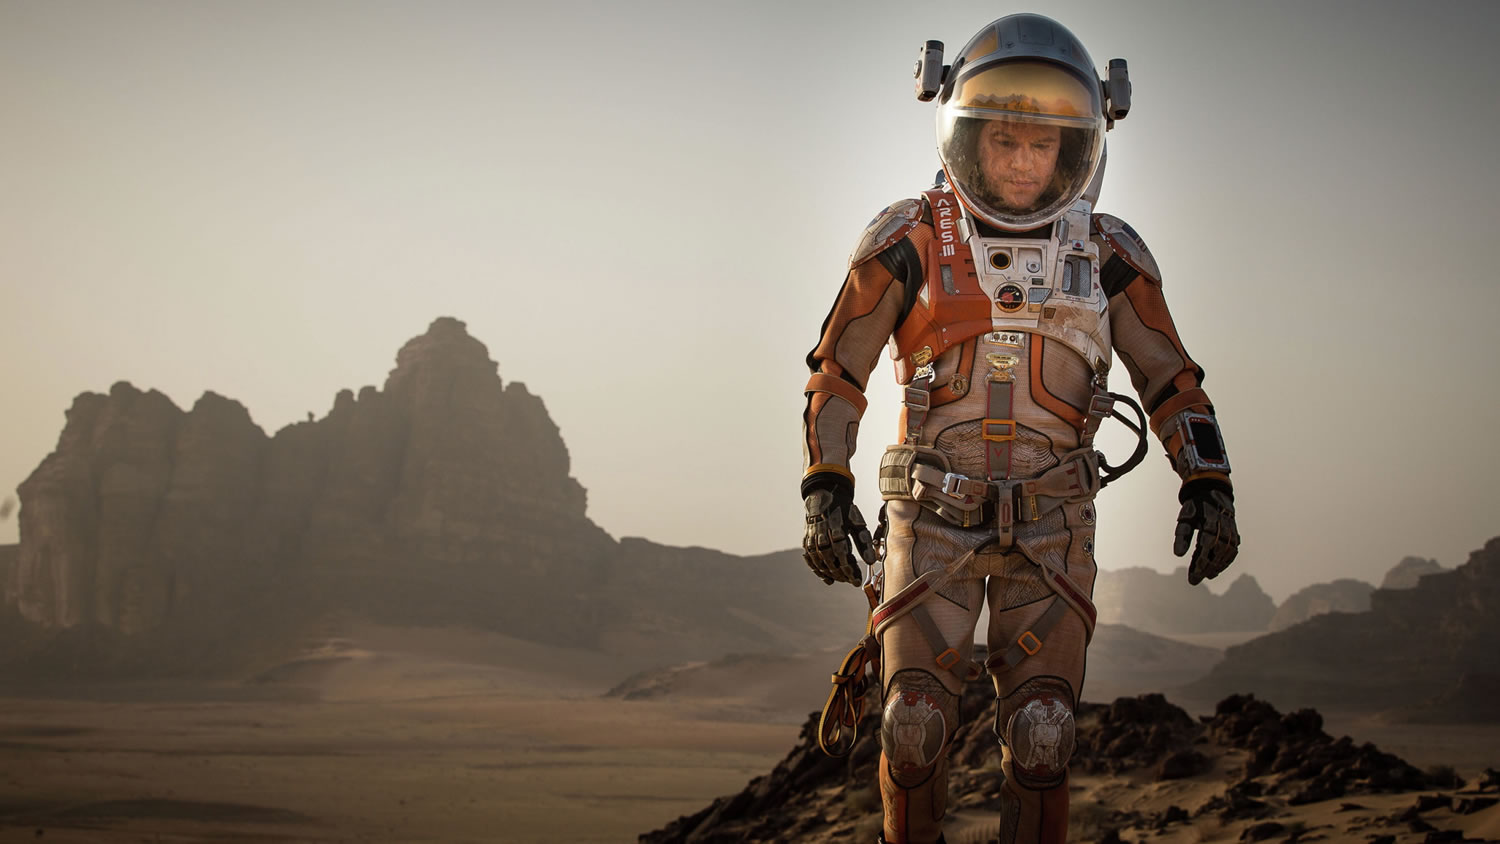 Matt Damon plays Mark Watney, an astronaut accidentally abandoned on Mars by his crew mates, in &quot;The Martian.&quot; (Aidan Monaghan/20th Century Fox)